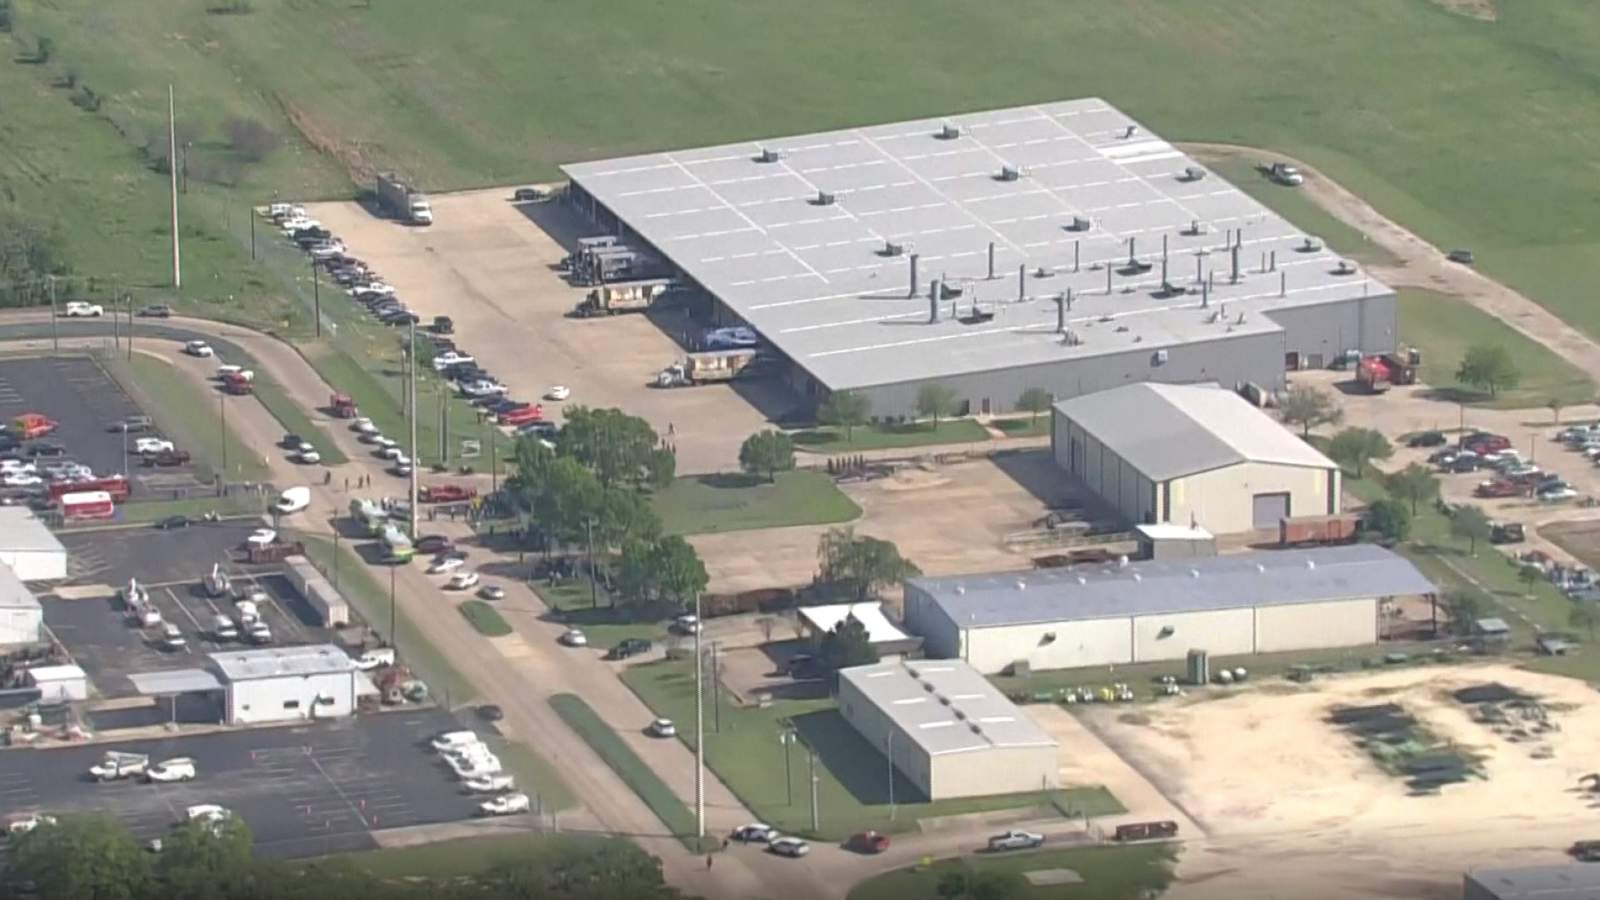 Motive unclear in deadly shooting at Texas cabinet business